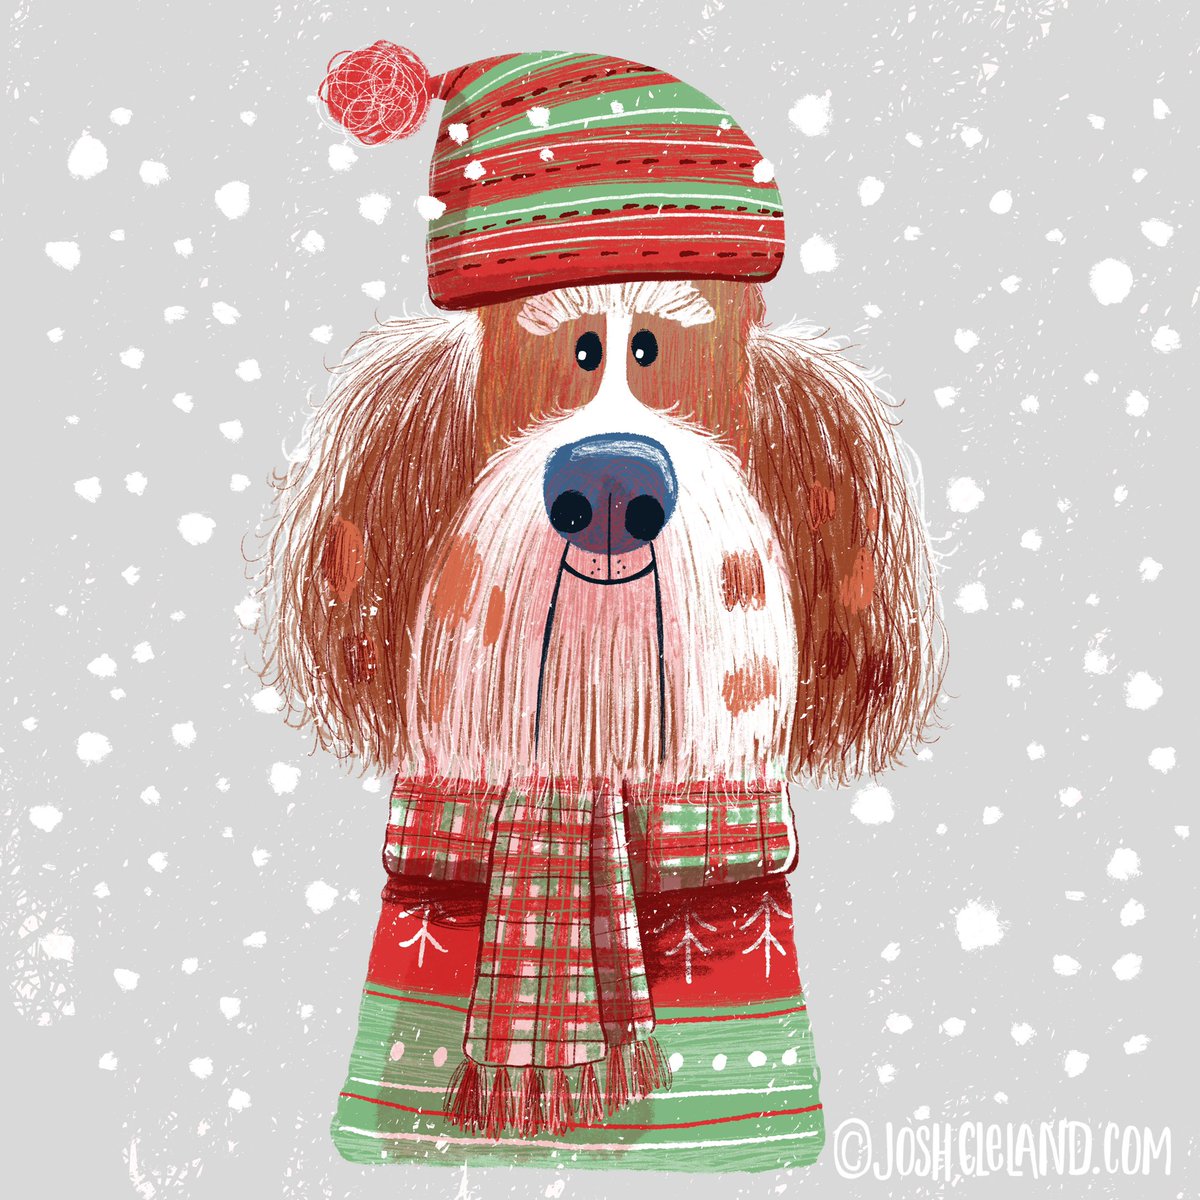 Quick painting in @Procreate . I hope you gave a fun, dog-filled happy holidays 😊🐶🎄